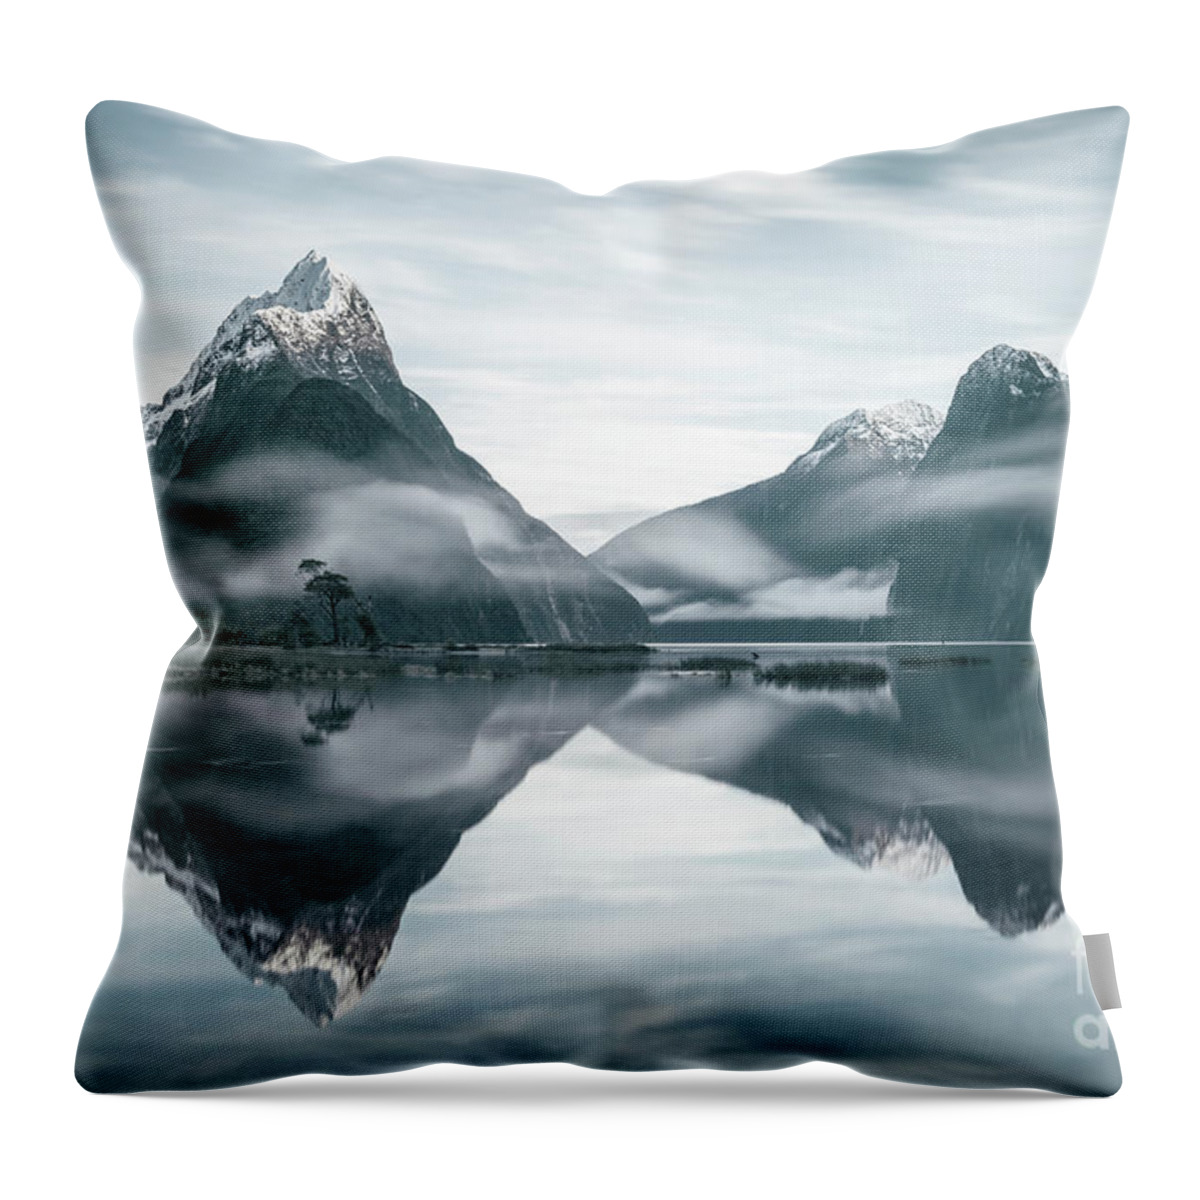 Kremsdorf Throw Pillow featuring the photograph A Fulfilled Dream by Evelina Kremsdorf